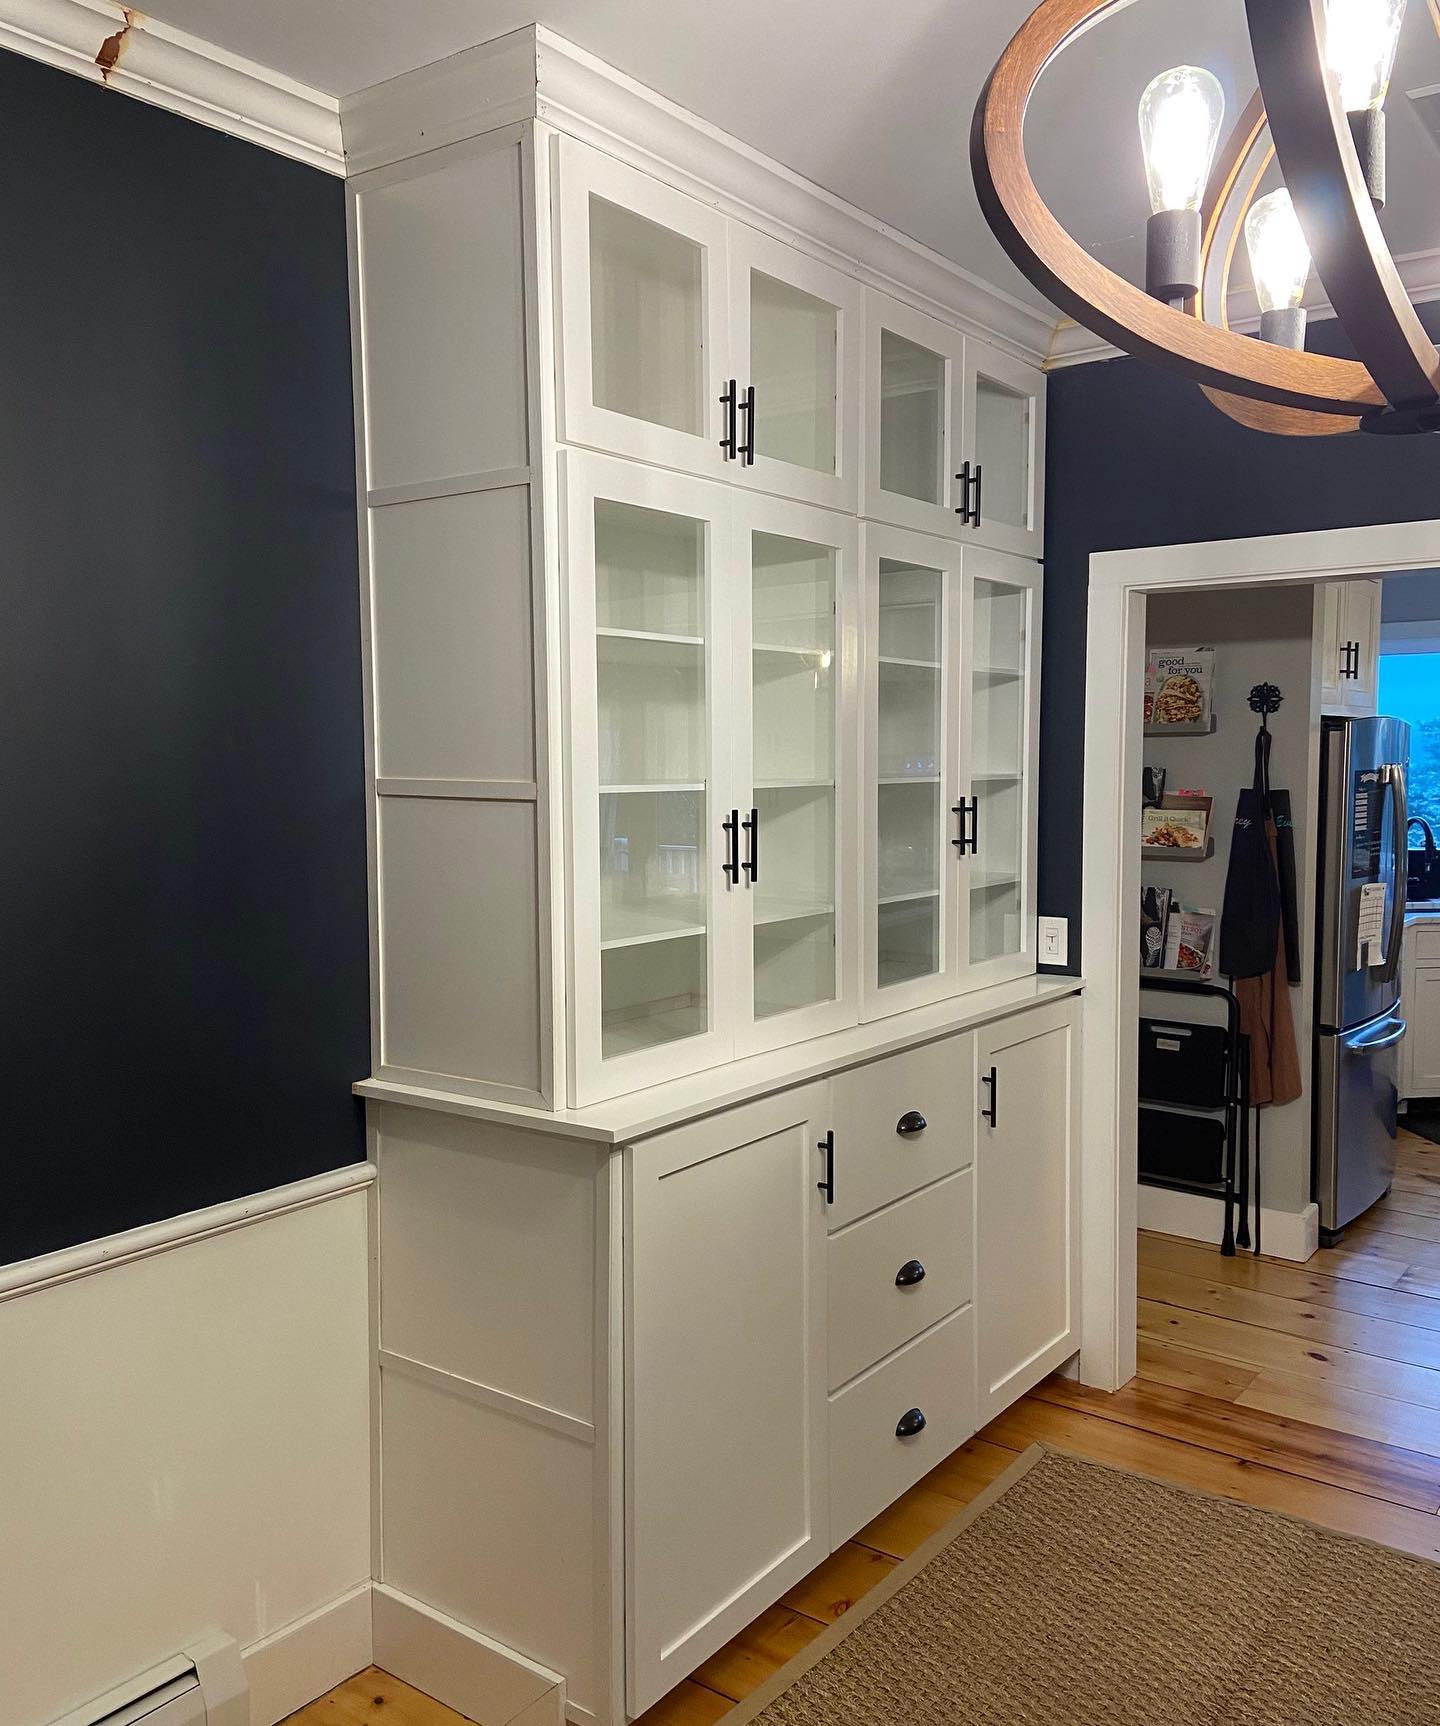 Built-in shelving is one of the best carpentry projects to elevate your home.